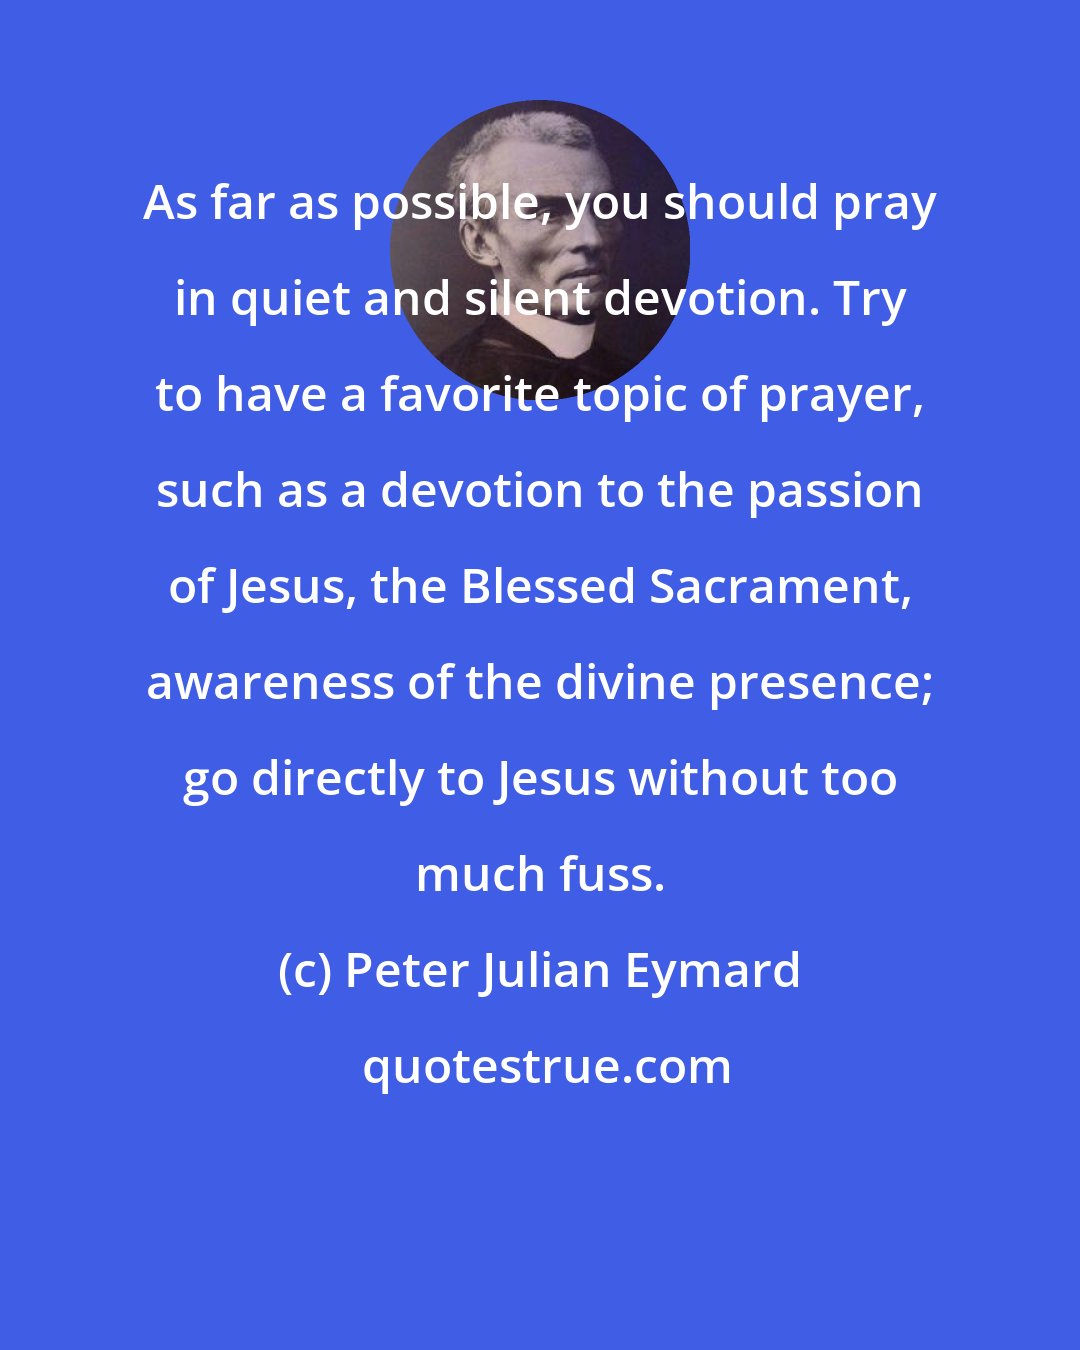 Peter Julian Eymard: As far as possible, you should pray in quiet and silent devotion. Try to have a favorite topic of prayer, such as a devotion to the passion of Jesus, the Blessed Sacrament, awareness of the divine presence; go directly to Jesus without too much fuss.